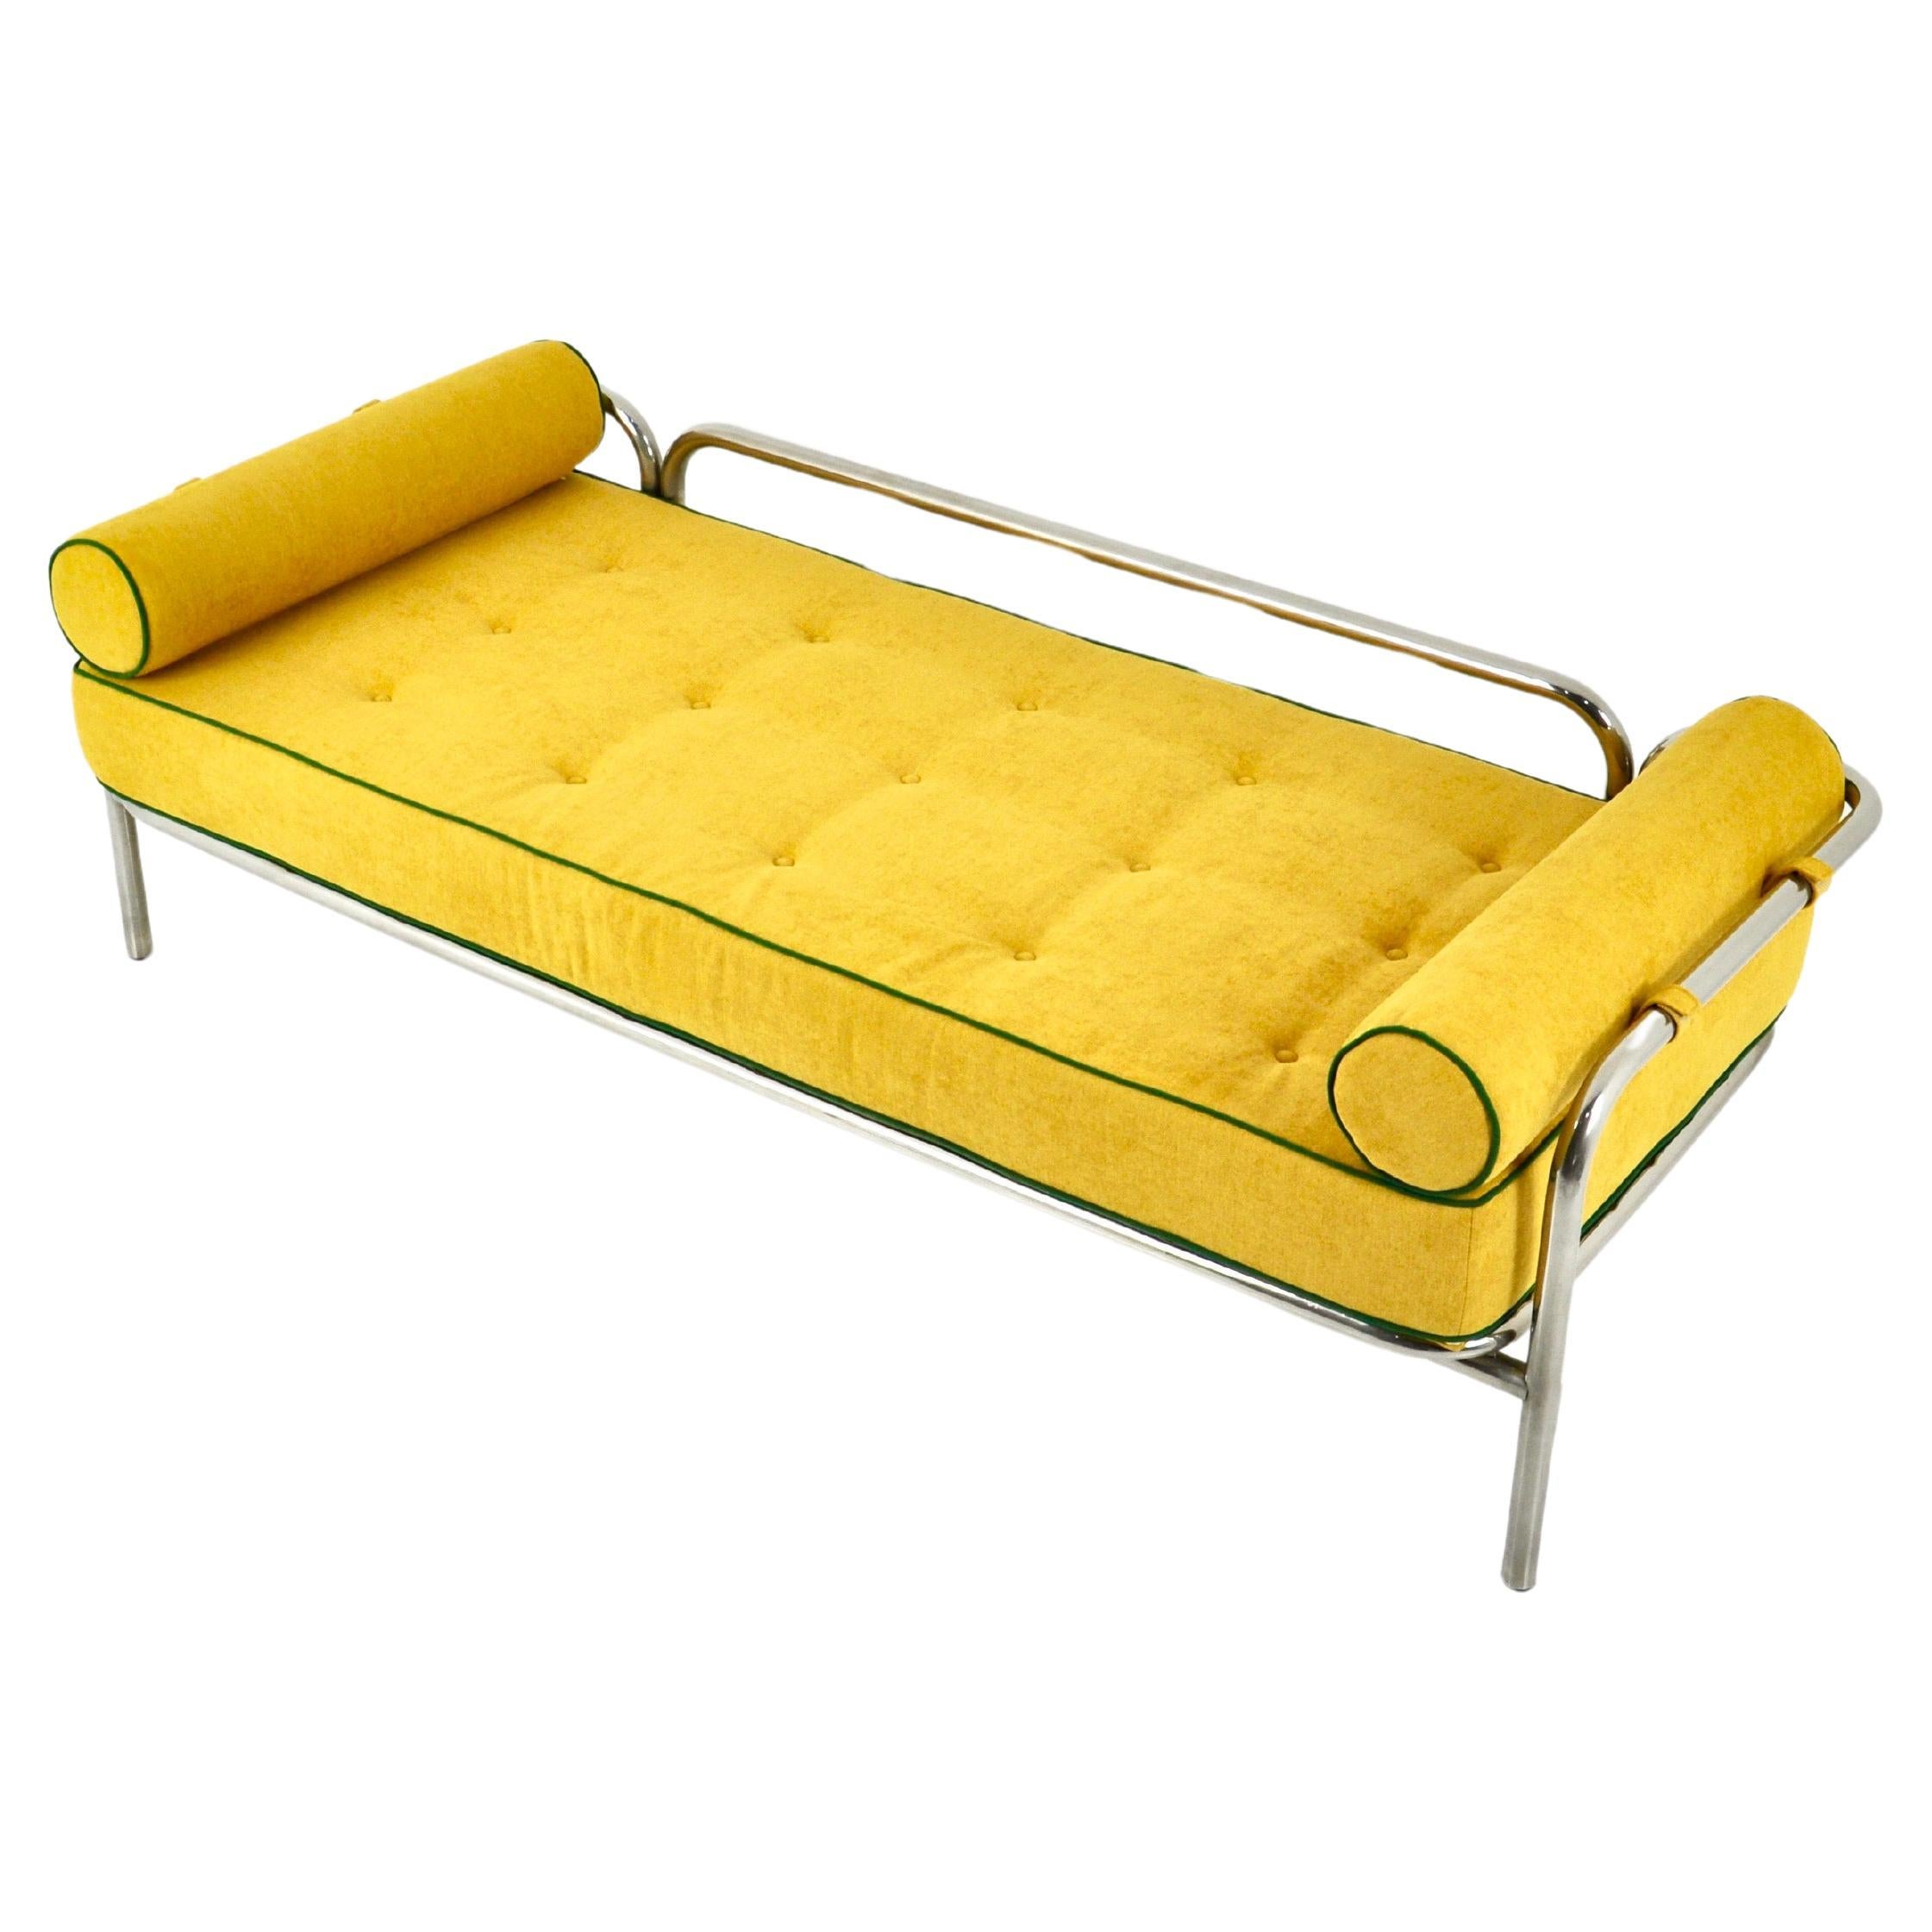 "Locus Solus" daybed by Gae Aulenti for Poltronova, 1960s